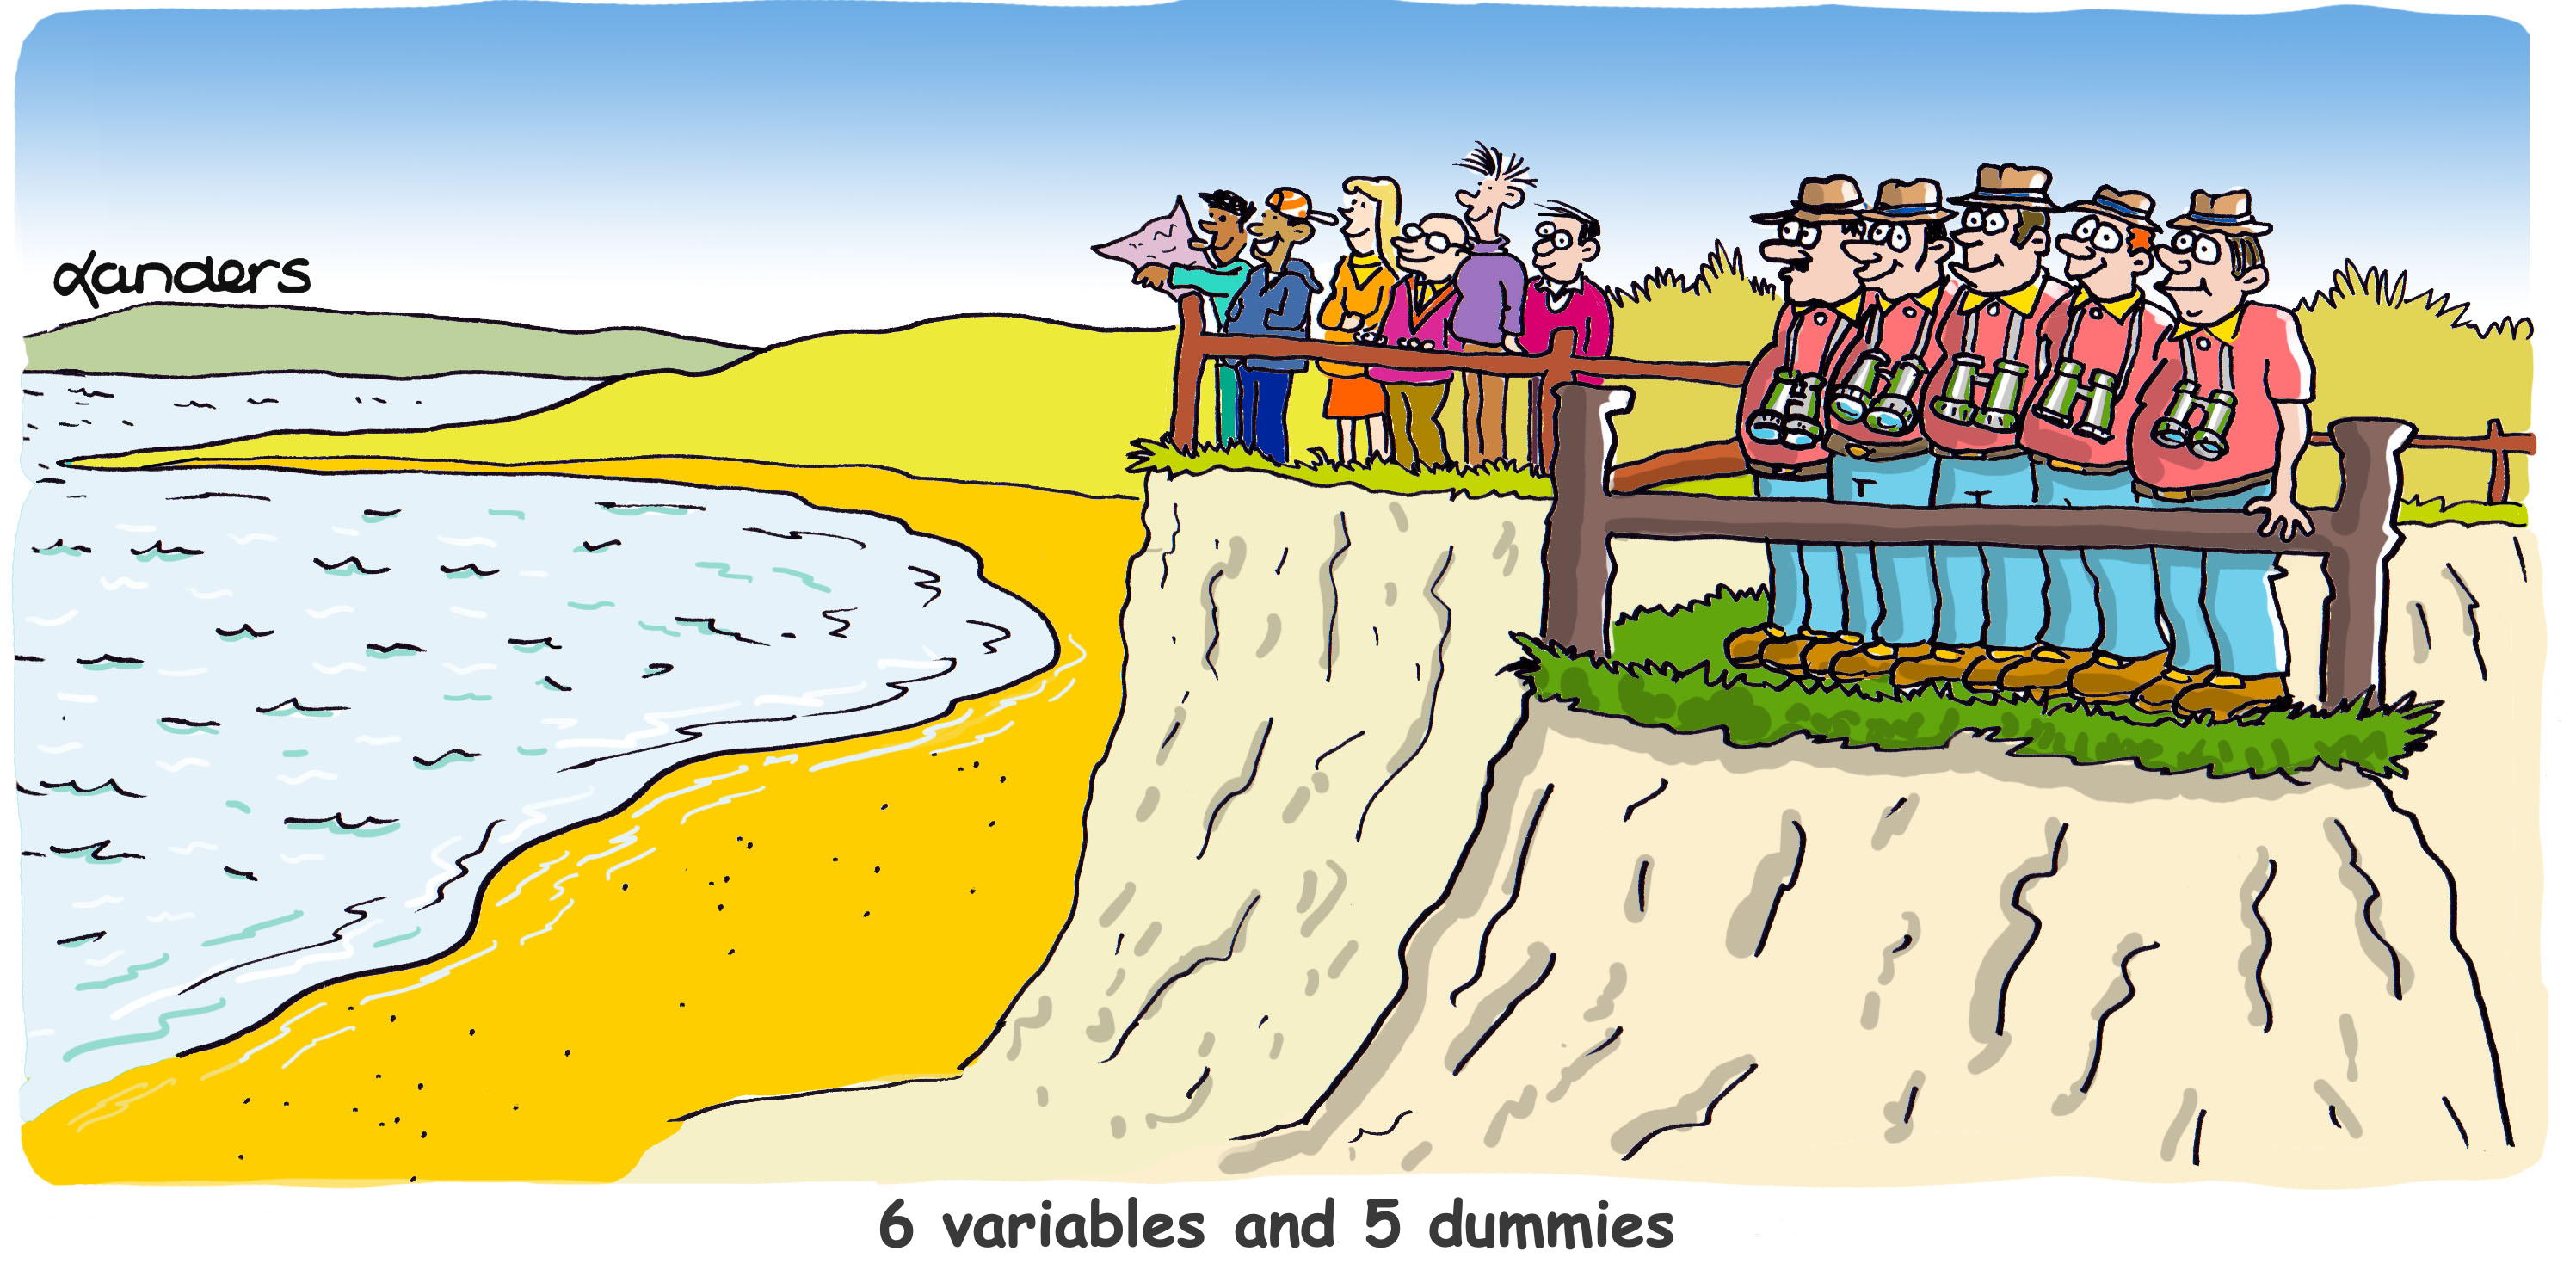 Cartoon with two groups overlooking Bay (one homogeneous and one diverse)